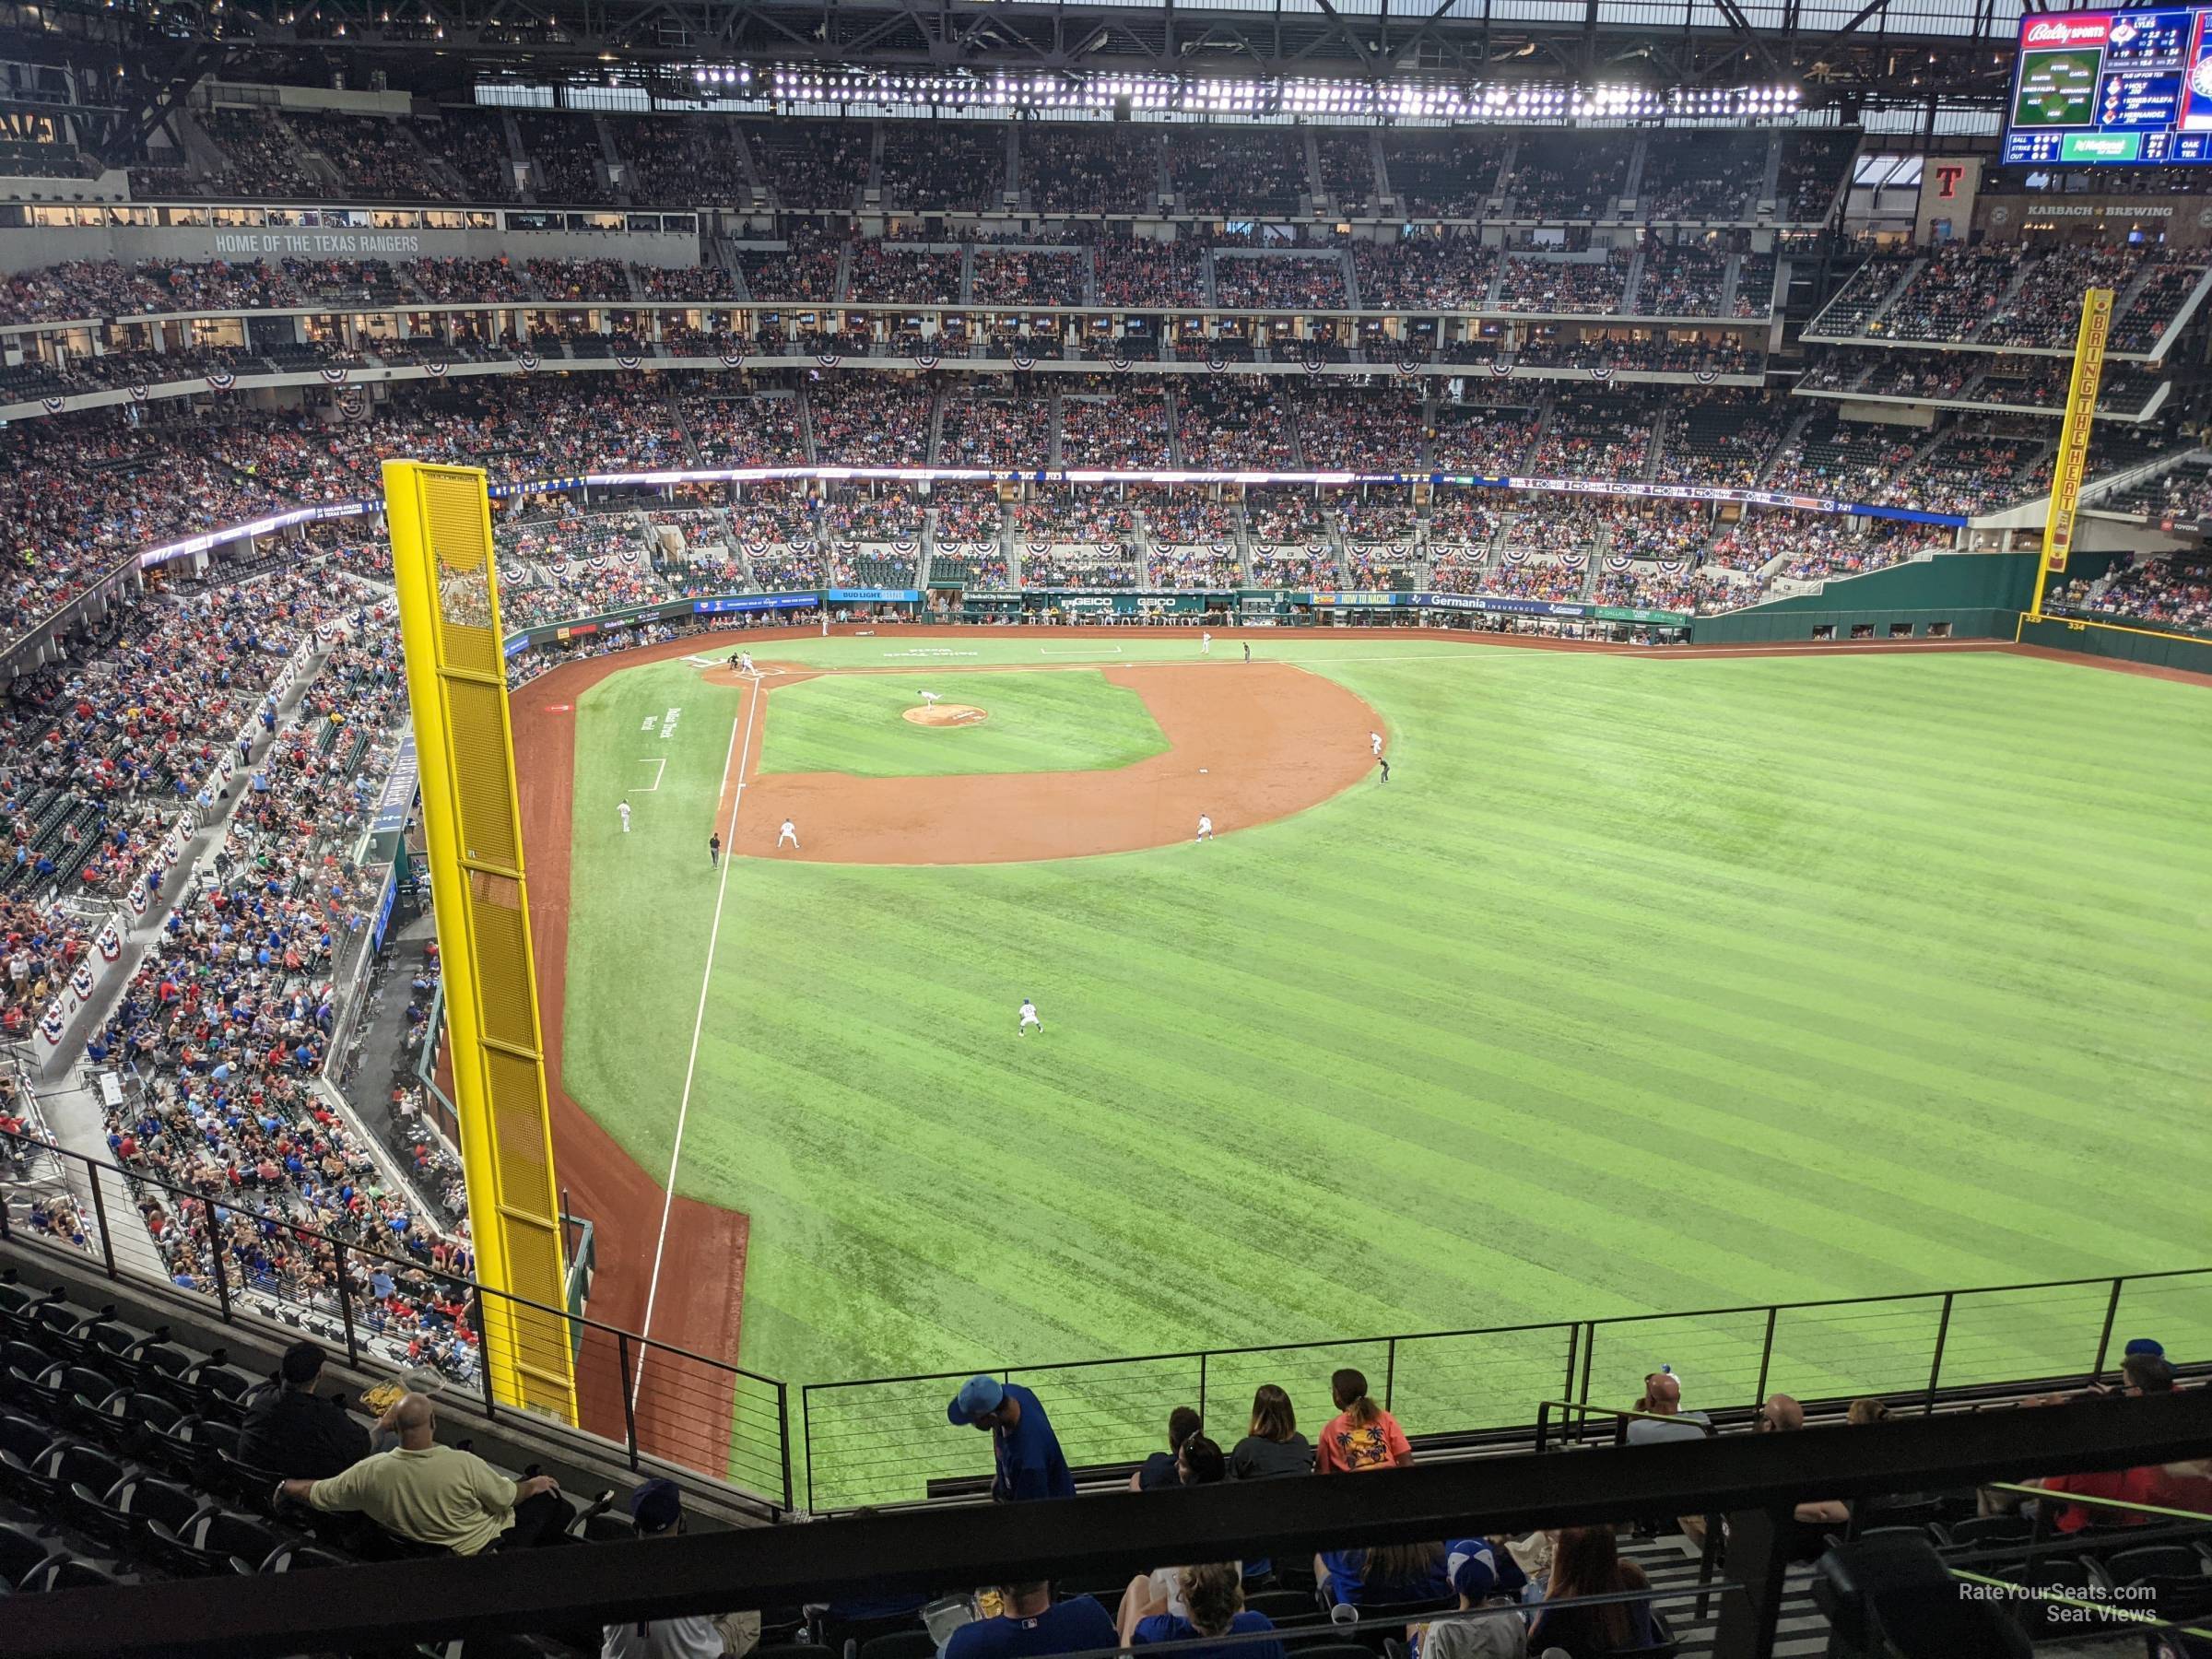 section 232, row 10 seat view  - globe life field